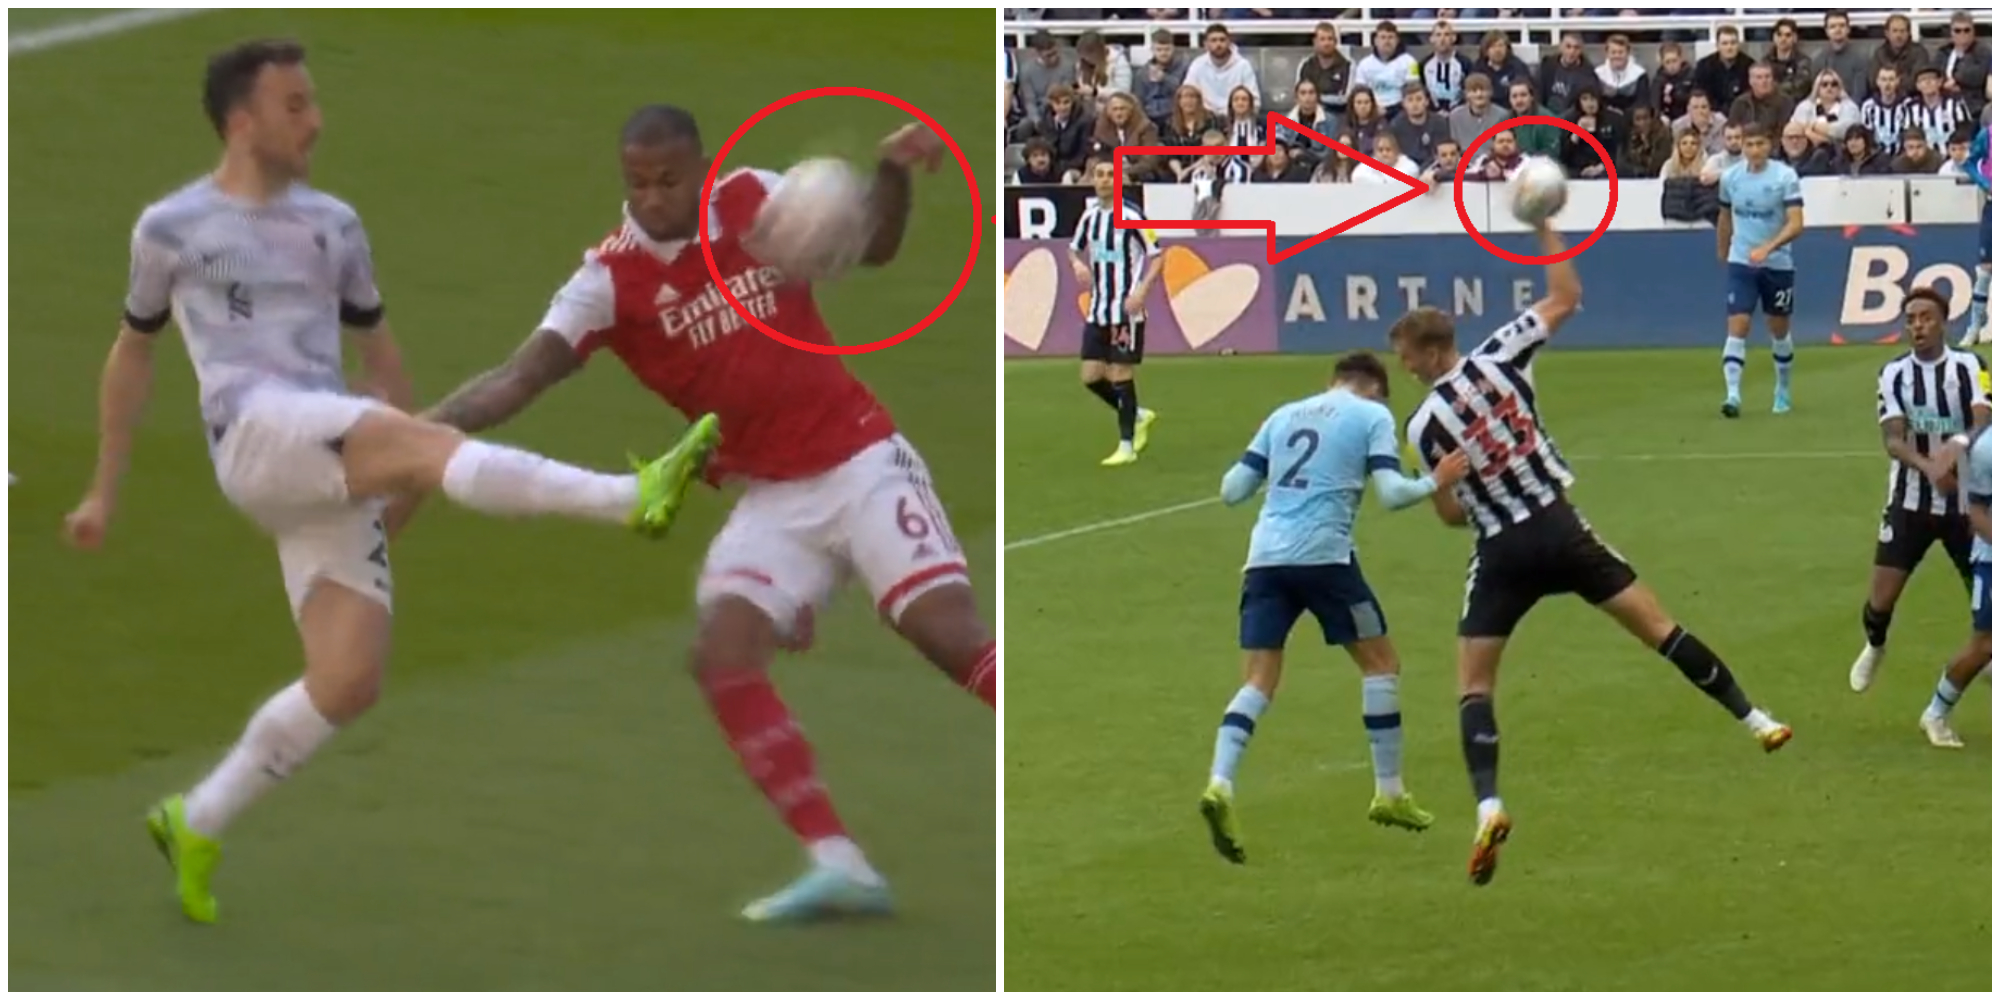 (Video) Handball rule hypocrisy as near carbon copy of Gabriel handball given against Newcastle – Liverpool fans will be gutted